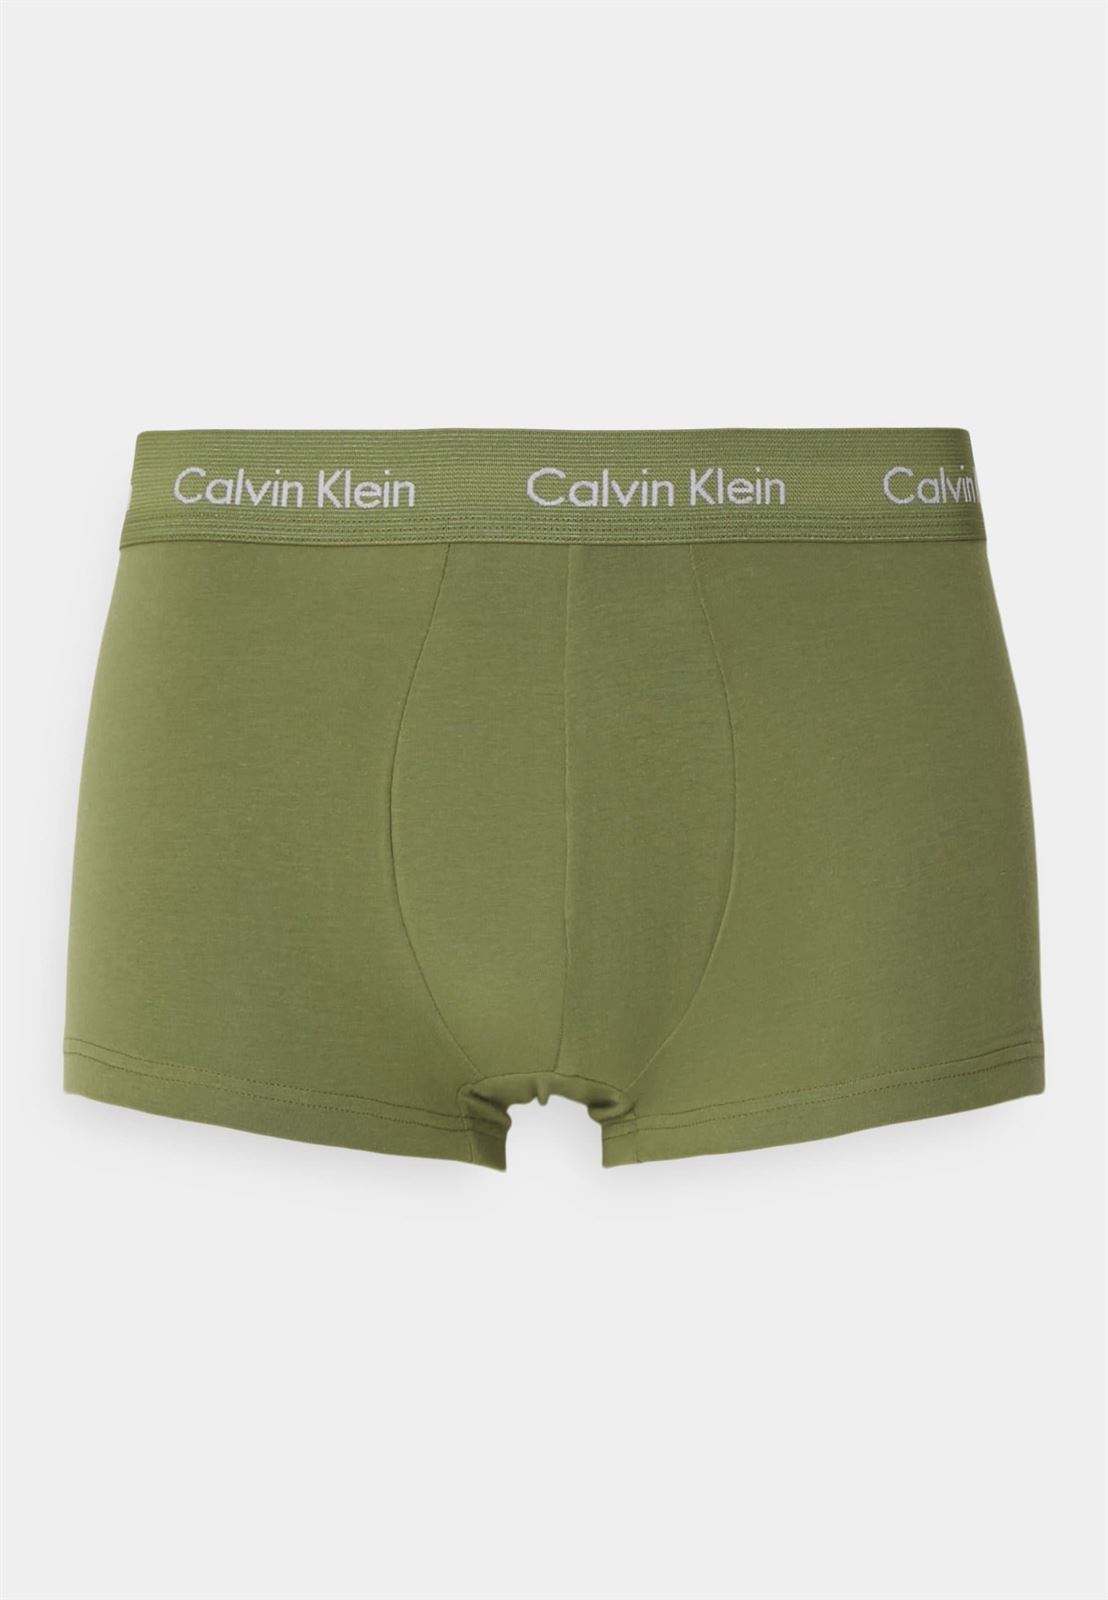 Pack 3 boxer Calvin Klein 0000U2664G H5M olv branch, charcoal gry, gry mist - Imagen 3